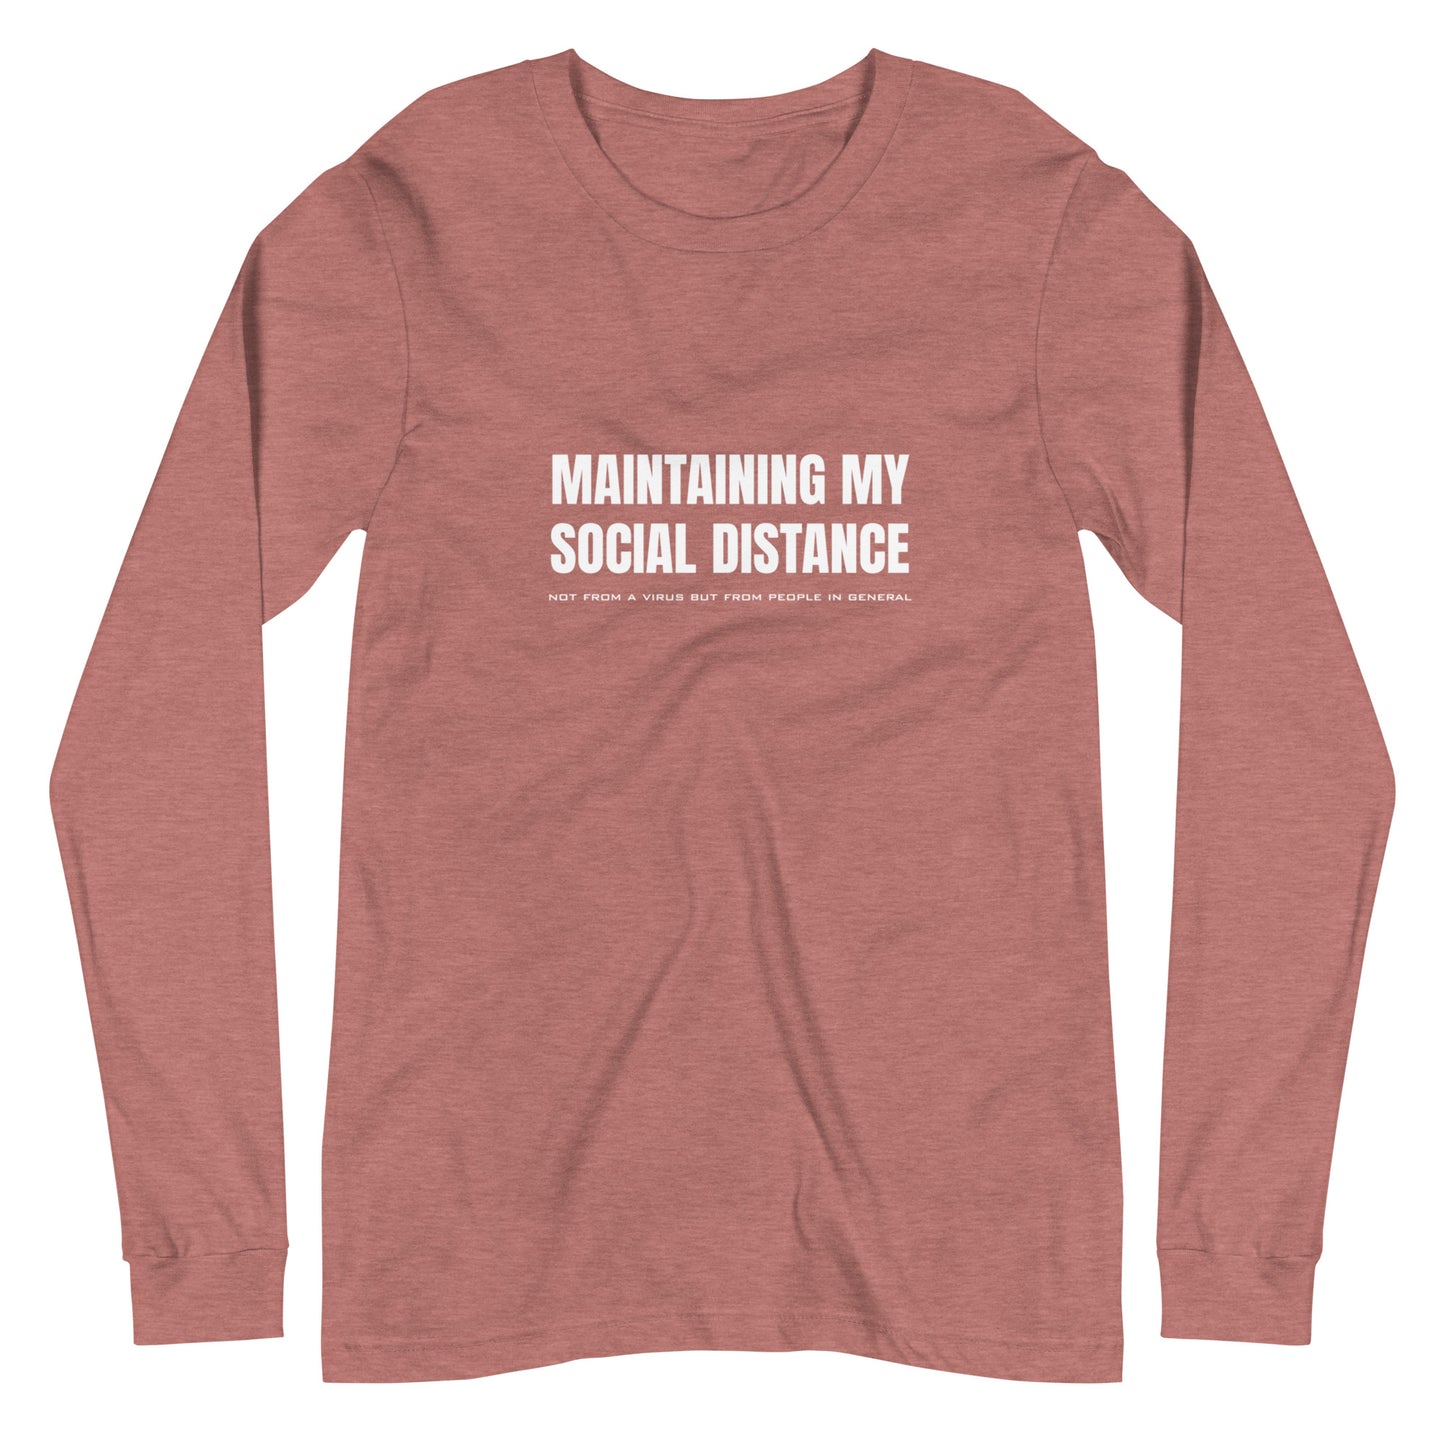 Heather Mauve long sleeve t-shirt with white graphic: "MAINTAINING MY SOCIAL DISTANCE not from a virus but from people in general"